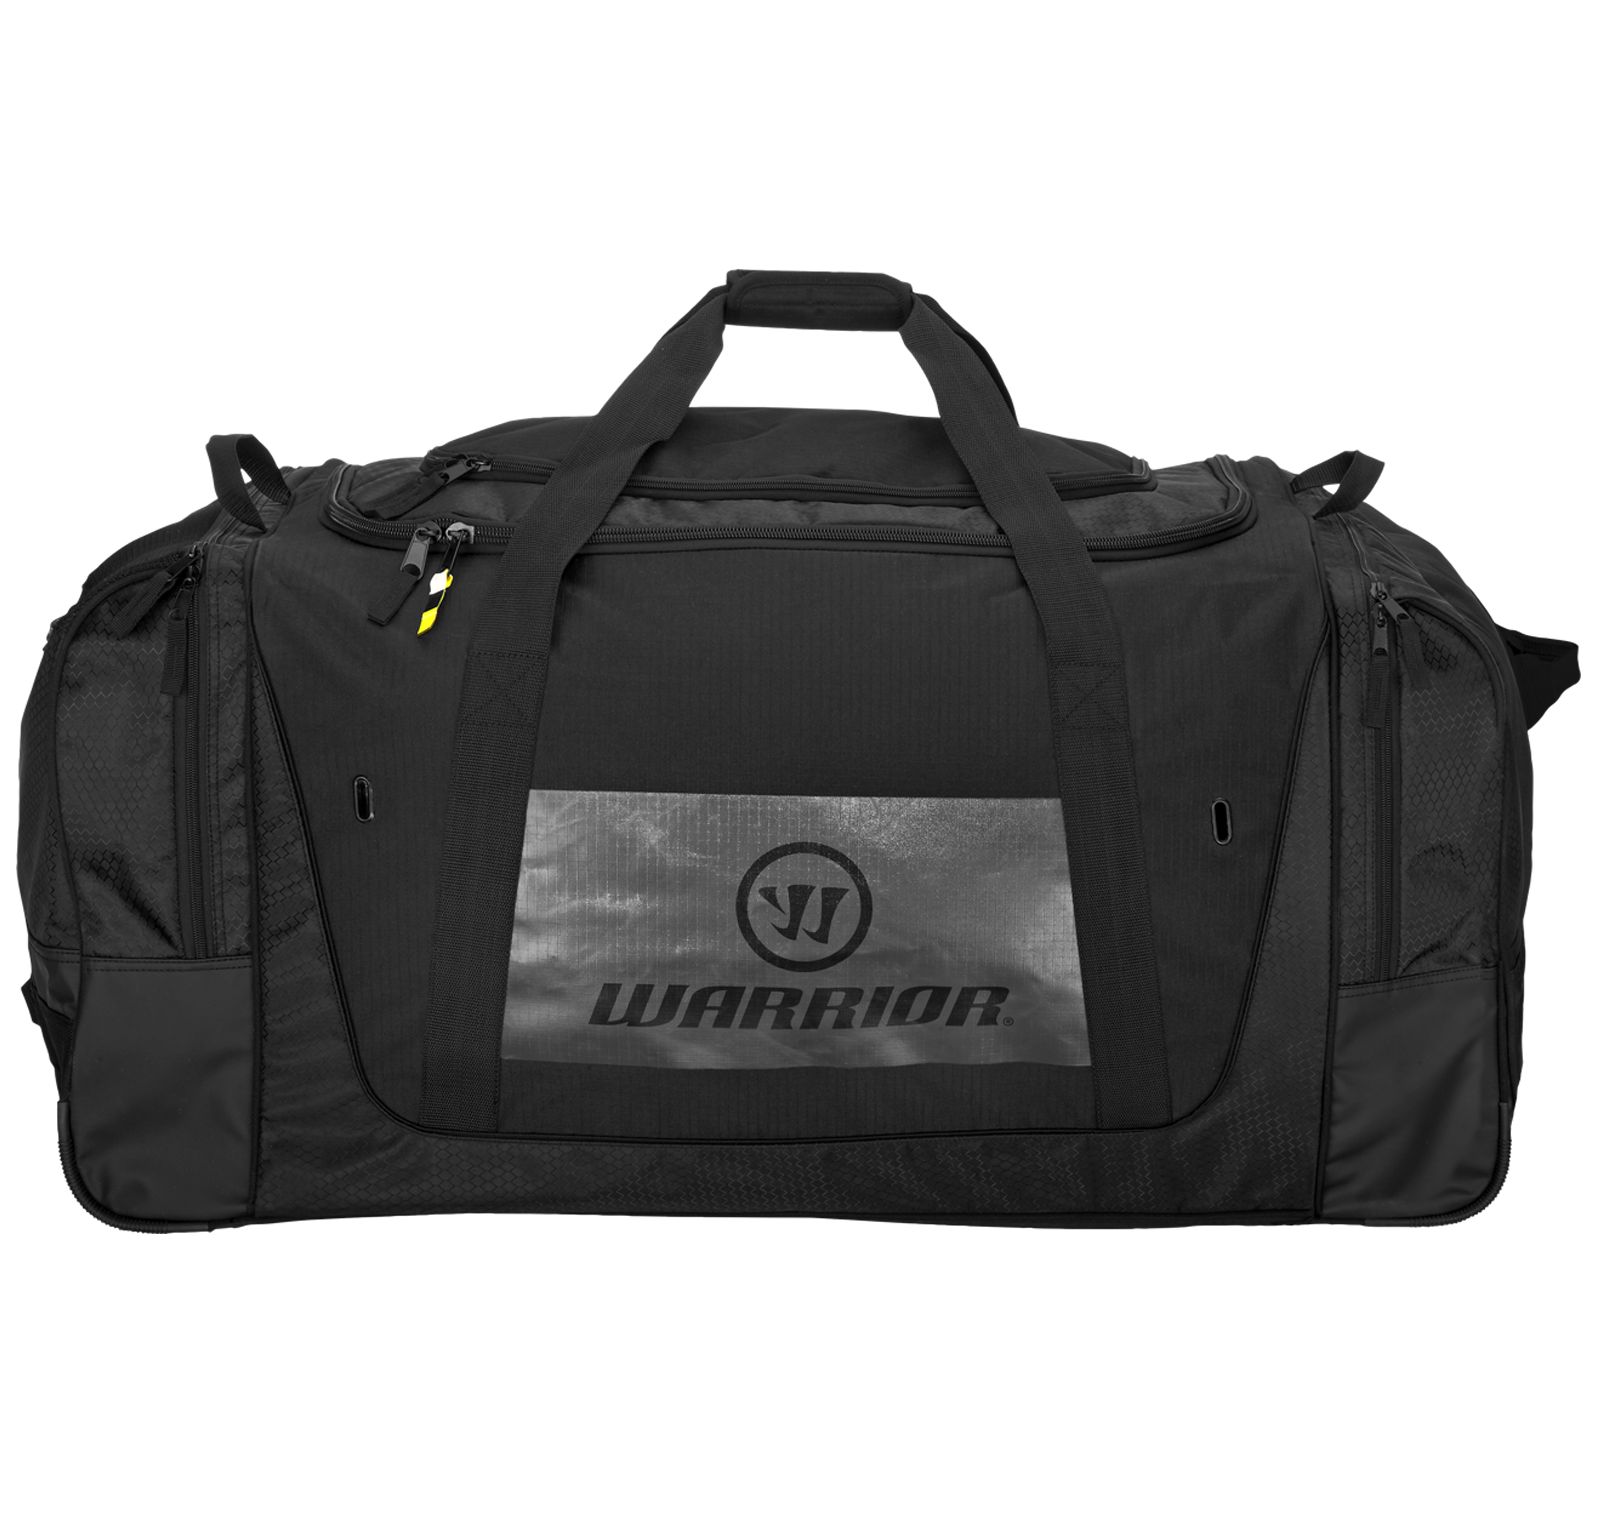 Q10 Cargo Carry Bag, Black with Grey image number 0